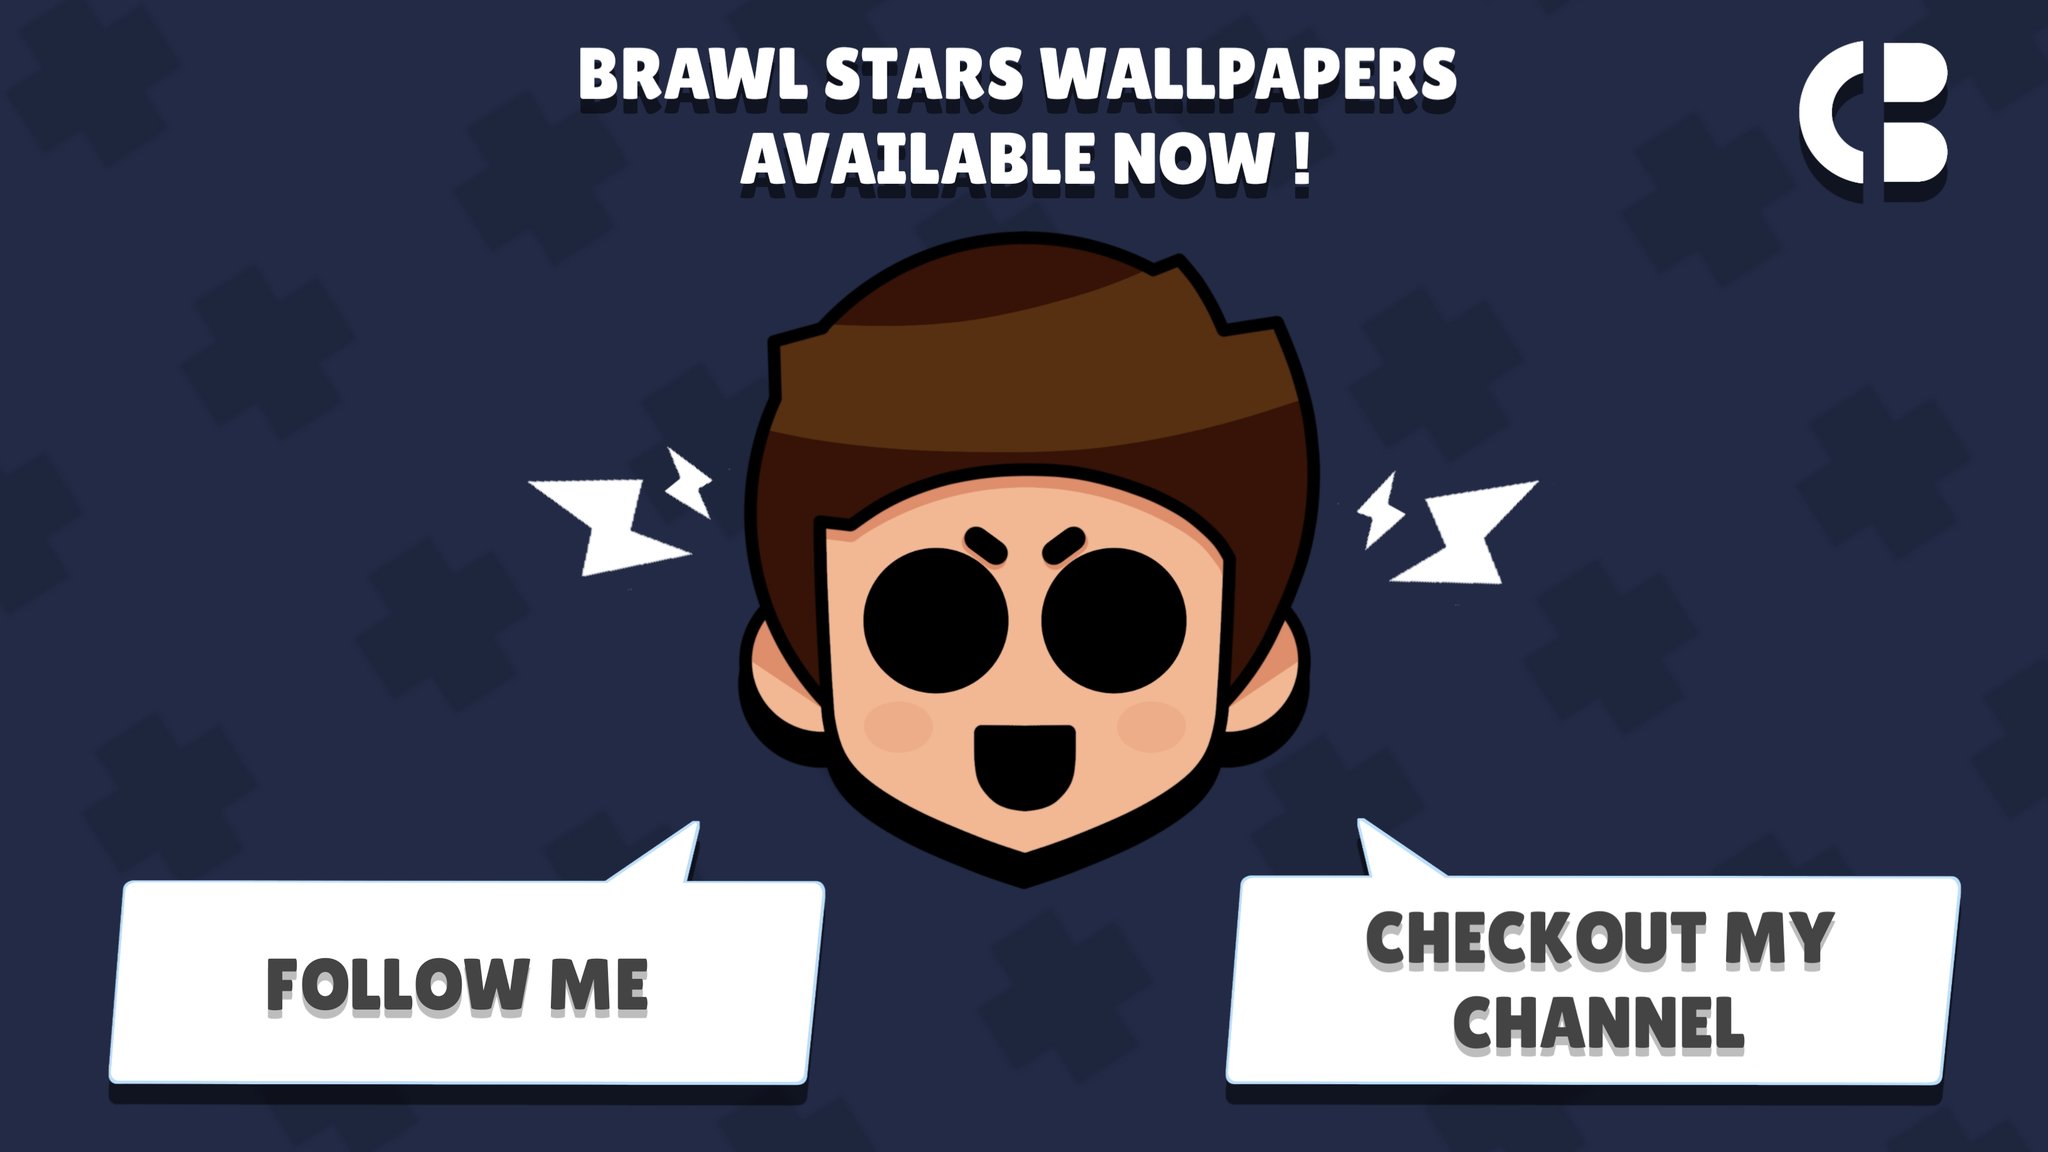 Cosmic On Twitter Brawl Stars Wallpapers Are Here For Brock 8 Bit Rico Thanks For The Support So Far Brawlstars Brawlart Wallpapers Brock 8bit Rico Brawlstars Brawlstarsin - brawl stars spik